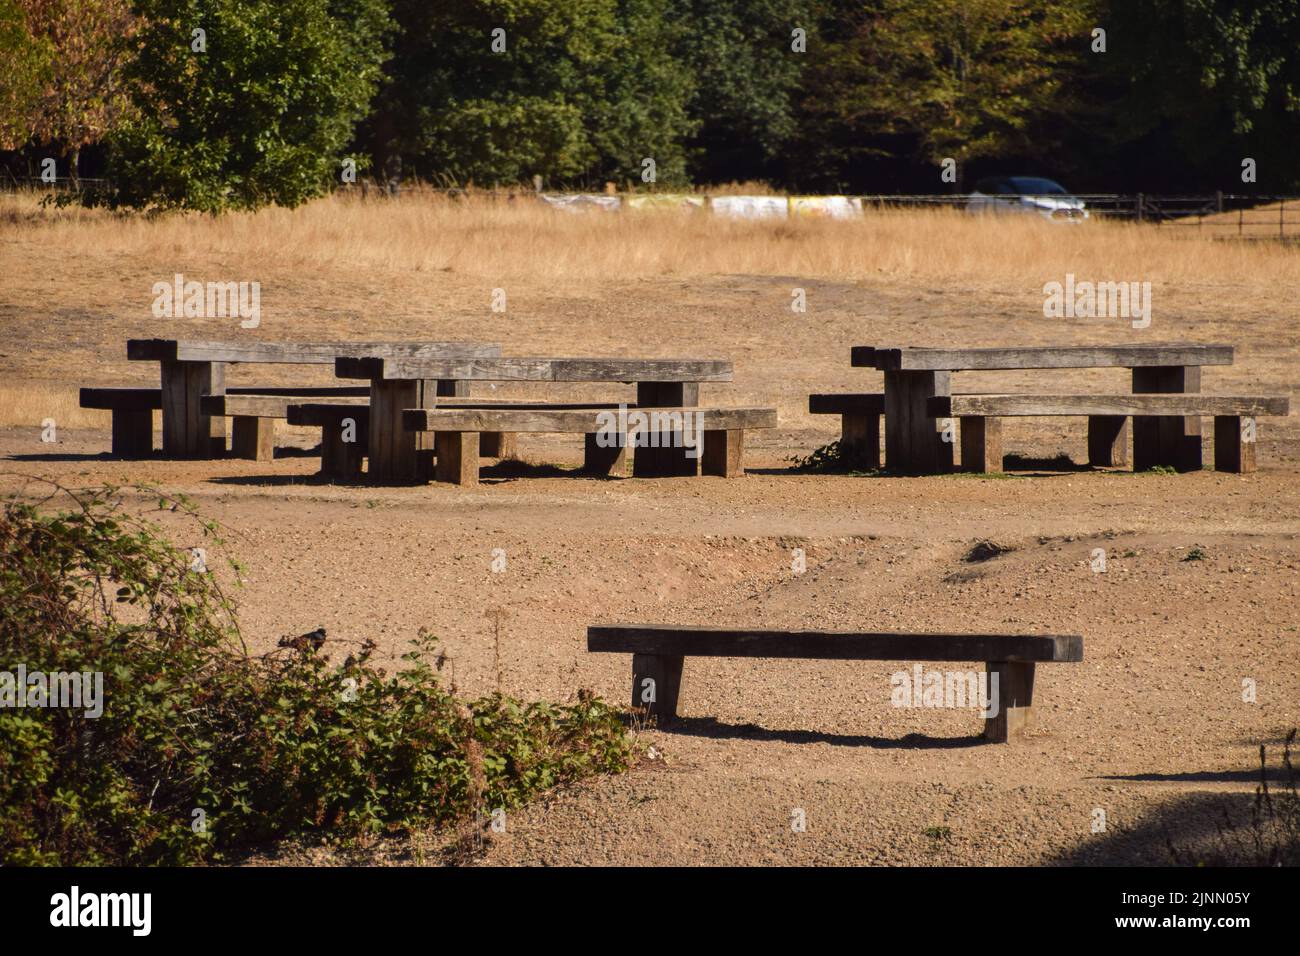 Empty picnic tables sit in the scorching sun in Wanstead Park in north-east London, as a drought is declared in parts of England. Persistent heatwaves resulting from human-induced climate change have affected much of London, with wildfires and droughts seen across the capital. Stock Photo